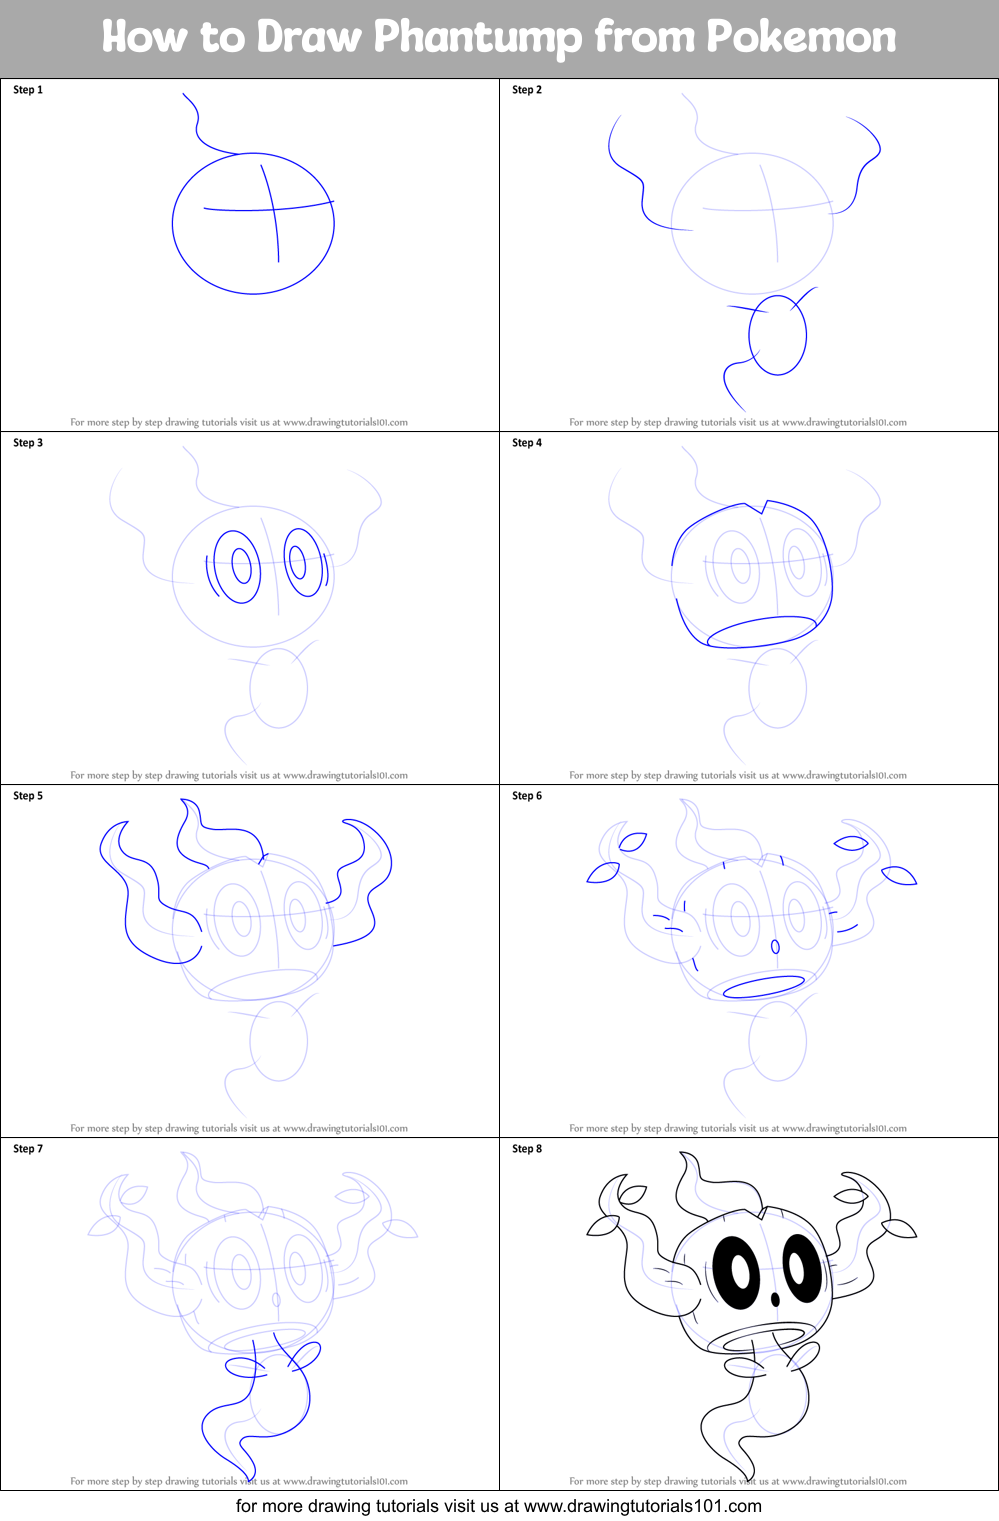 How to Draw Phantump from Pokemon printable step by step drawing sheet